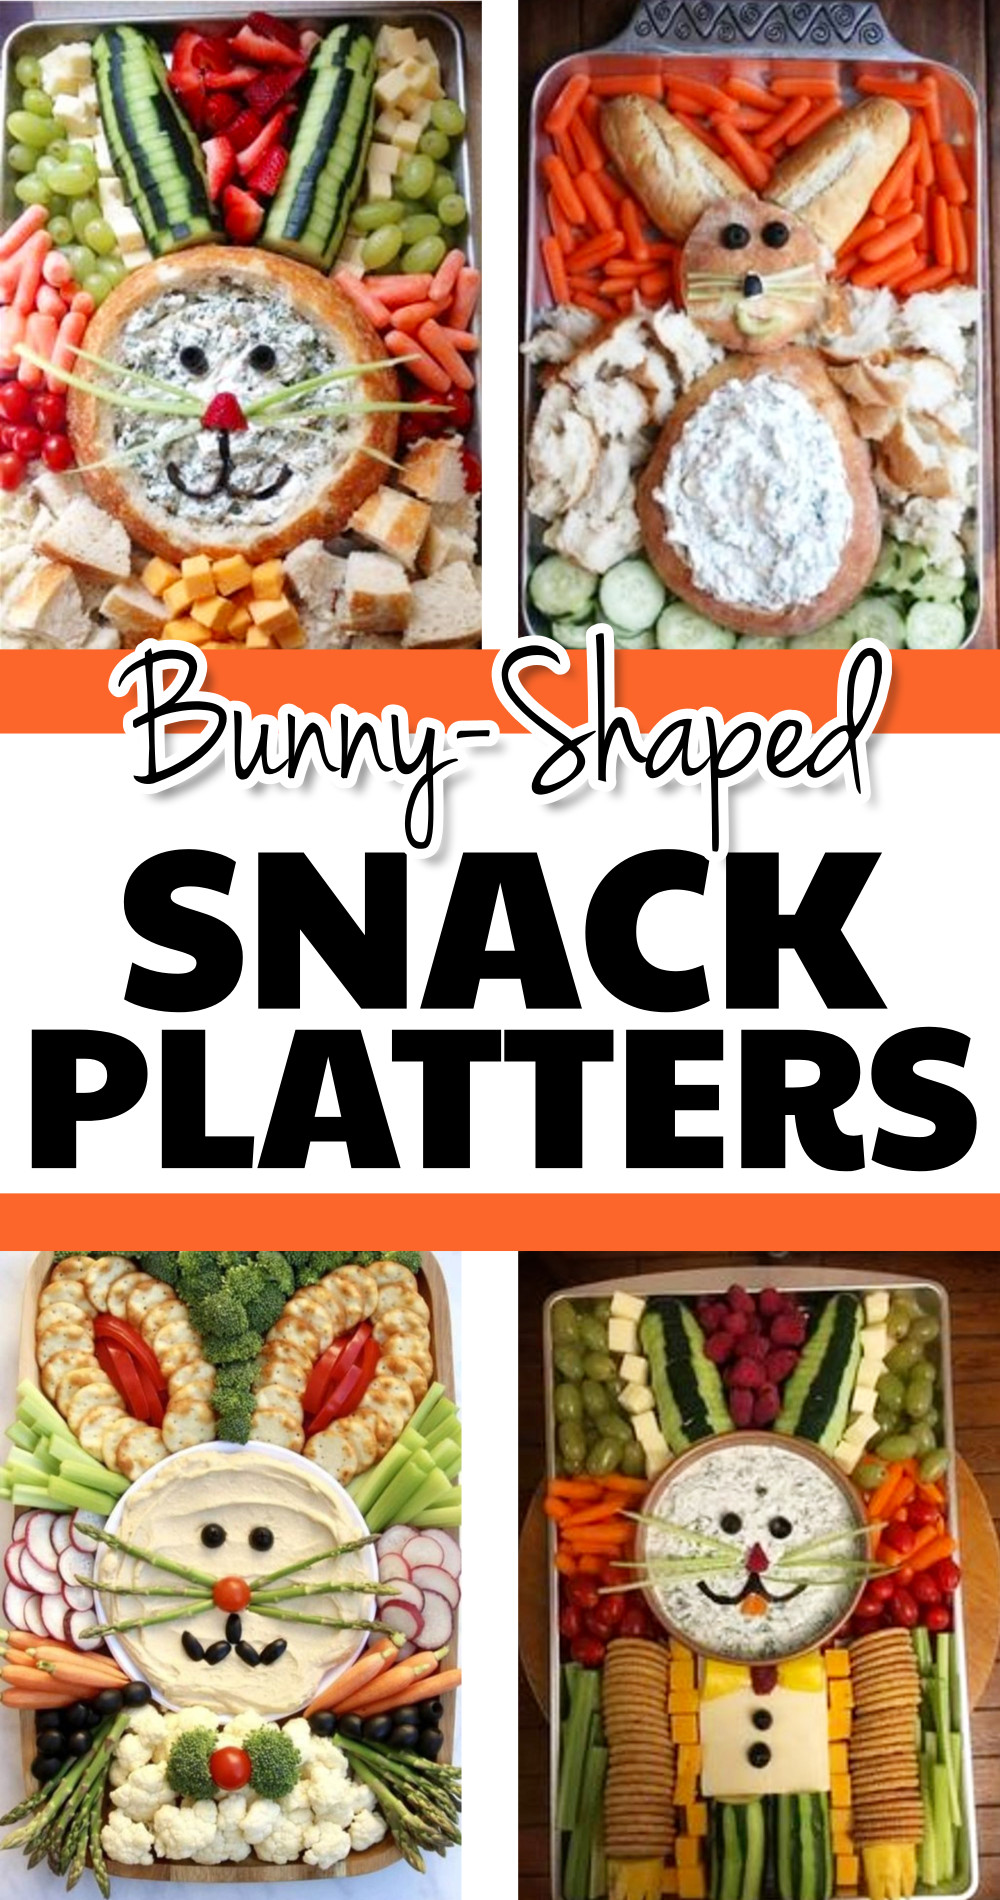 4 bunny shaped snack platters